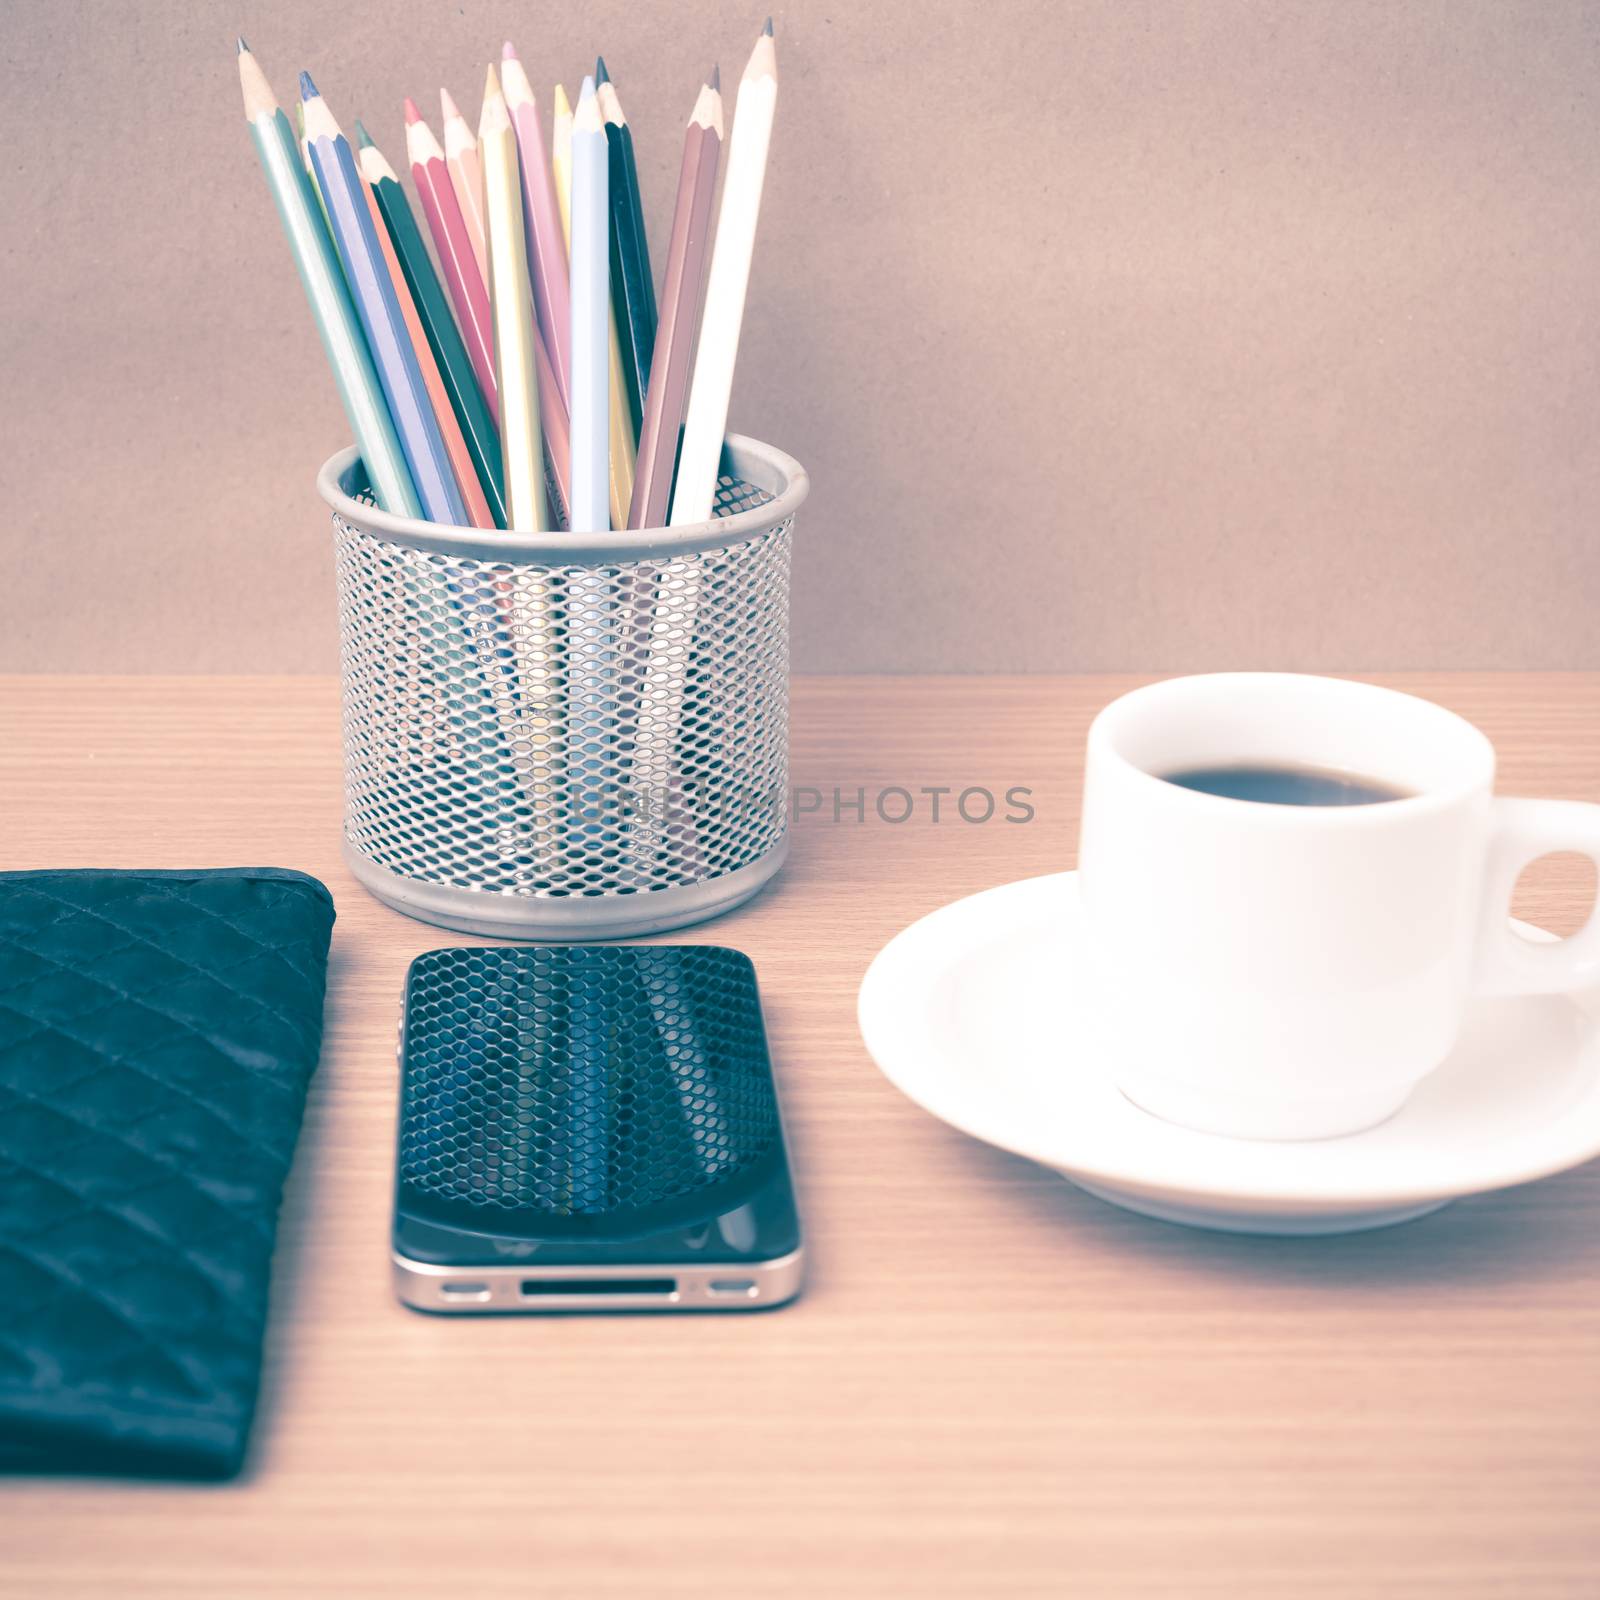 coffee,phone,wallet and color pencil on wood table background vintage style